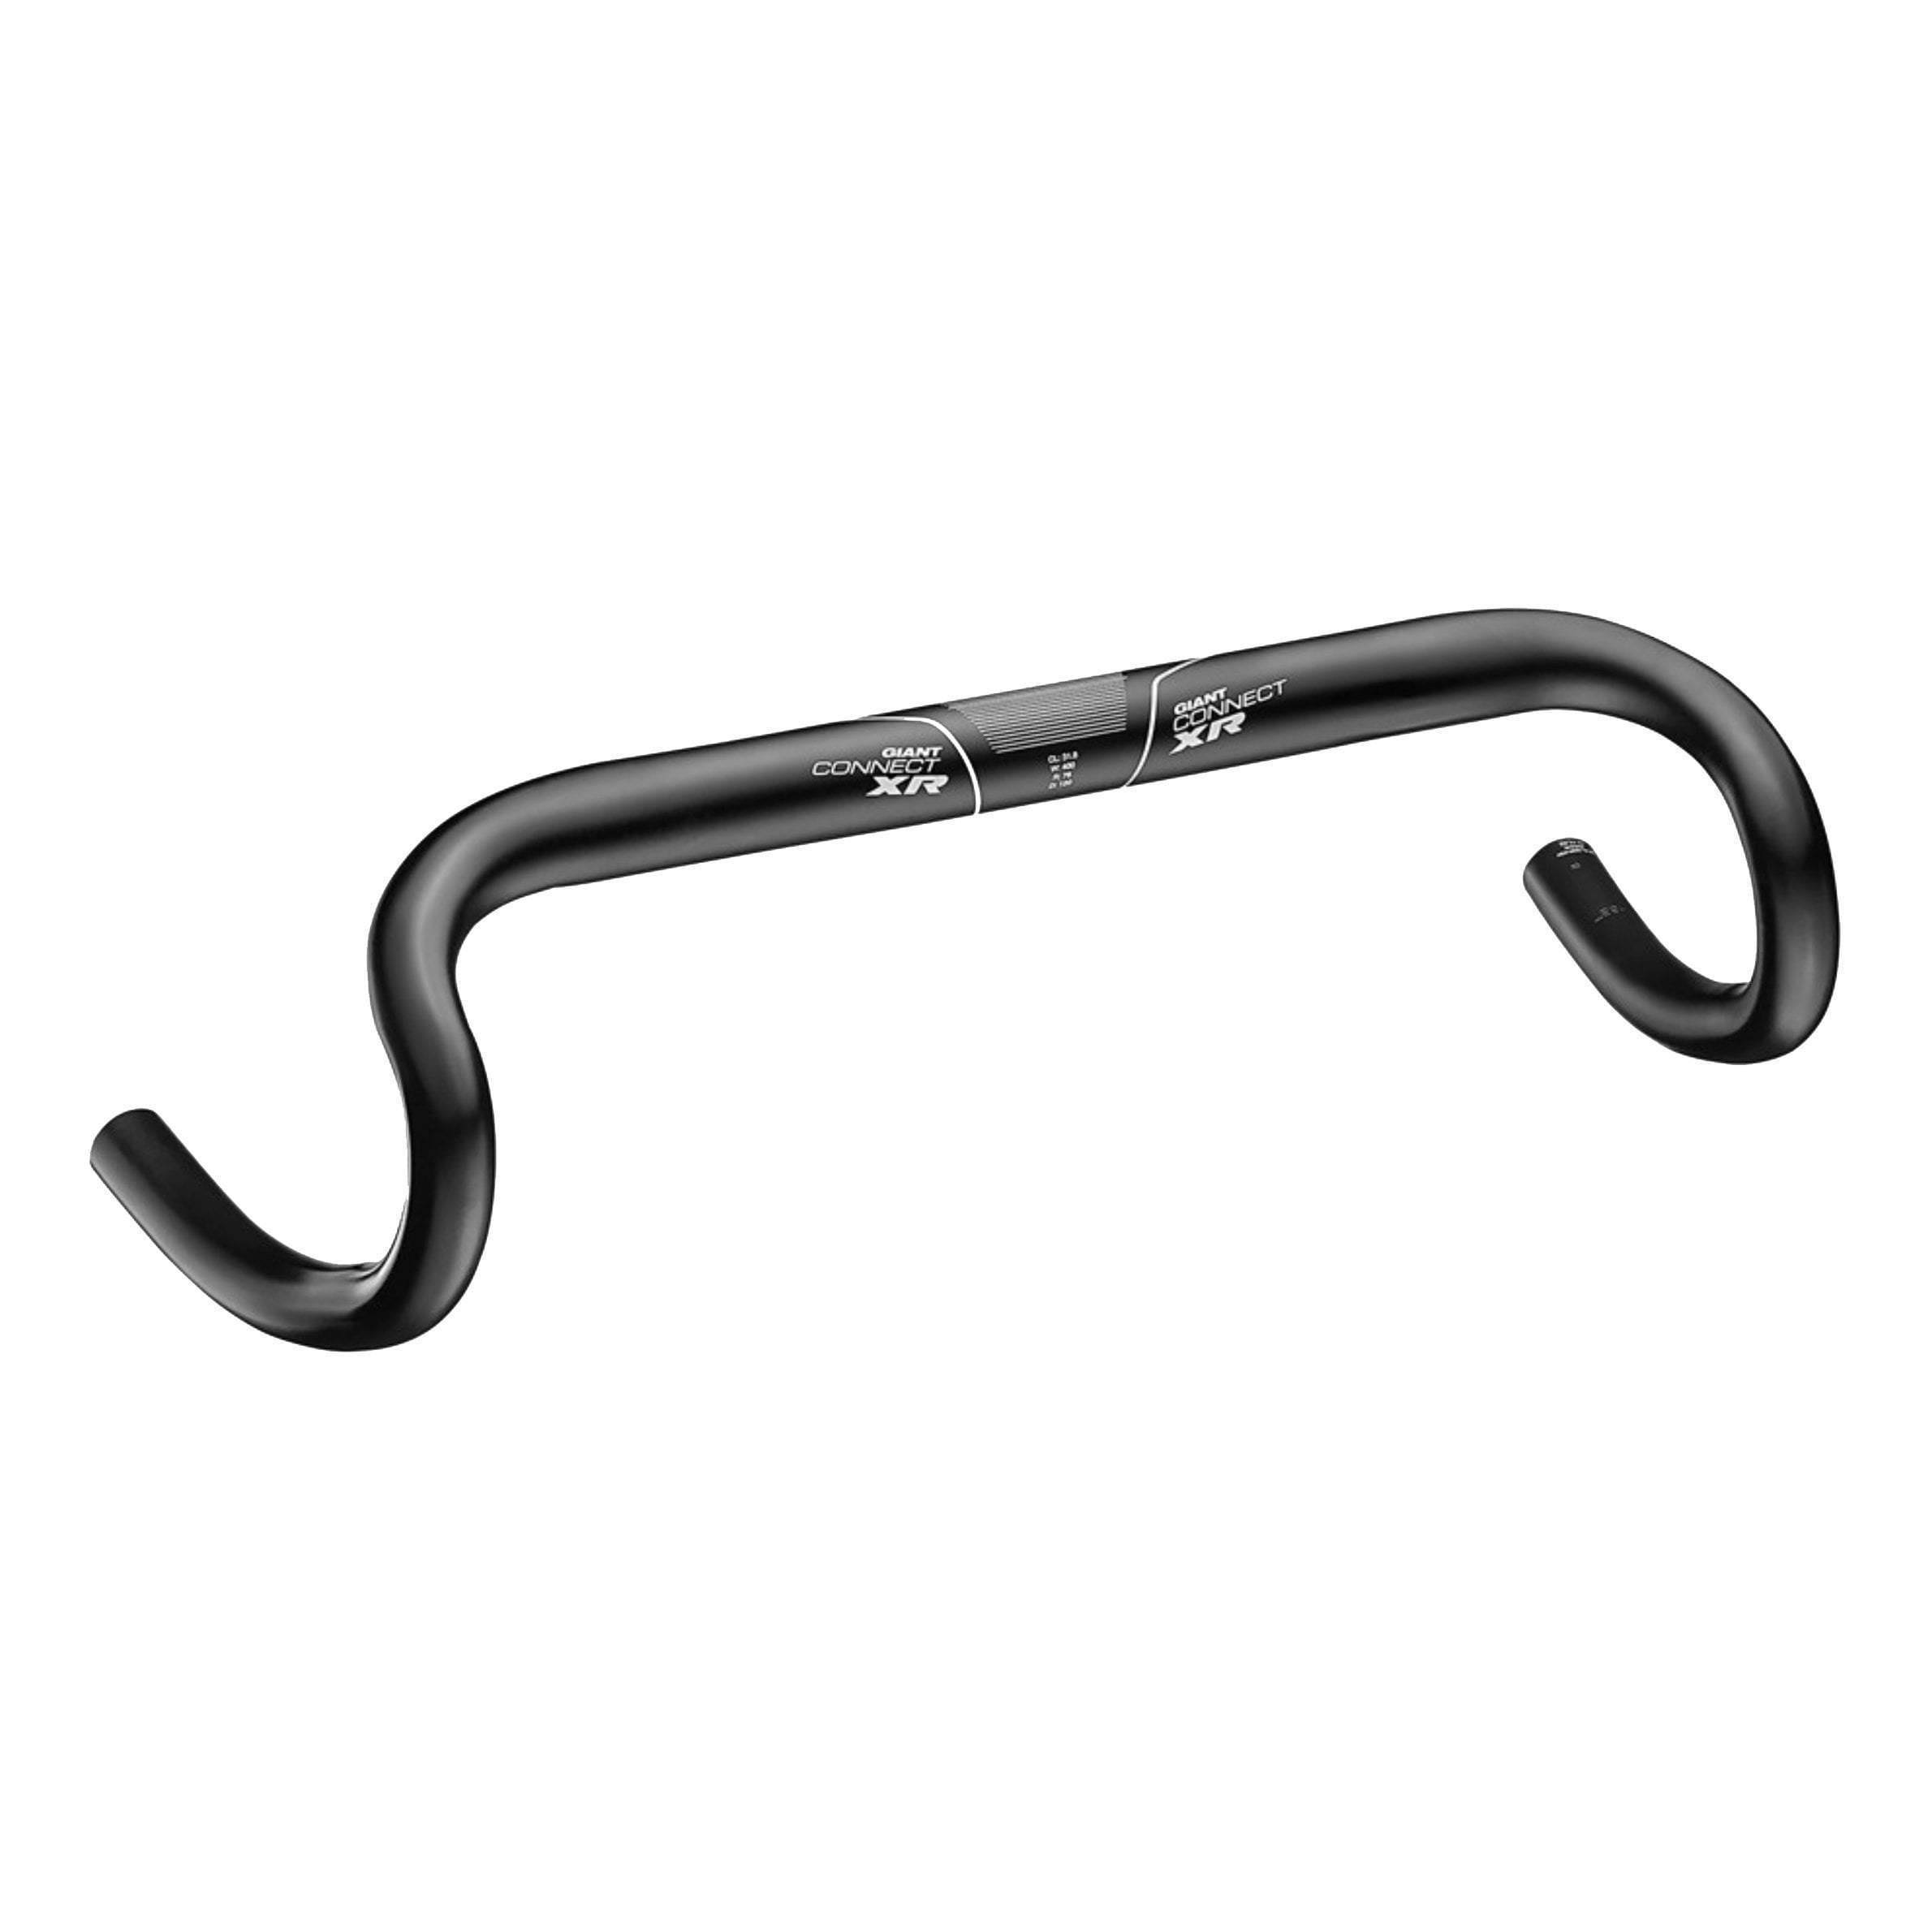 Giant Connect XR Flared Road Handlebars